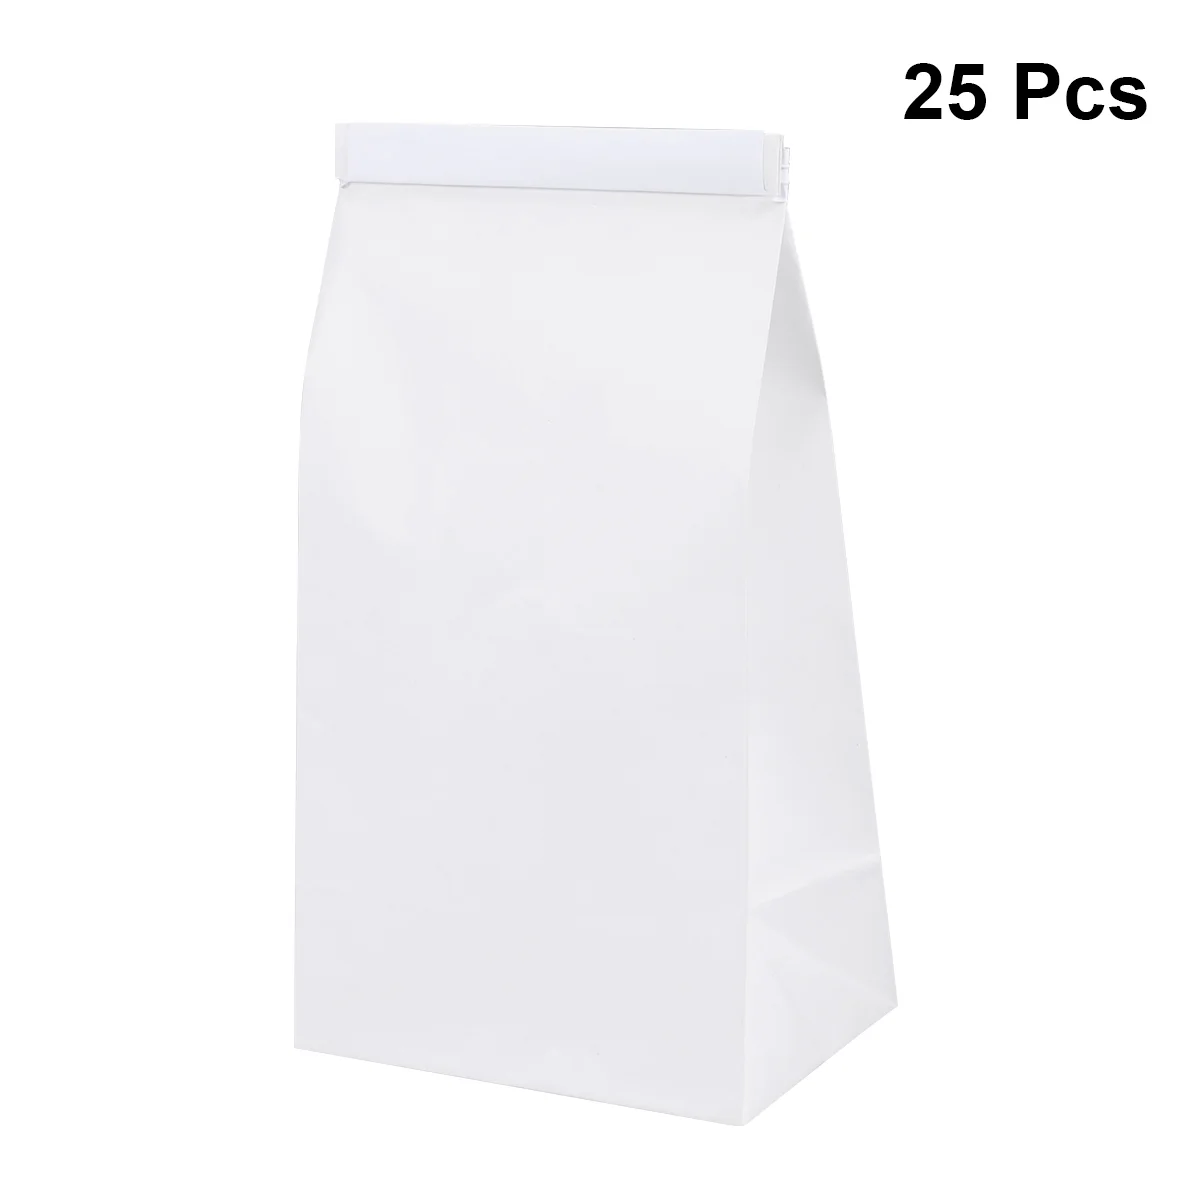 25/30pcs Vomit Bags Disposable Barf Bags Morning Sickness Motion Sickness Cleaning Bag Travel Motion Sickness Vomit Bags